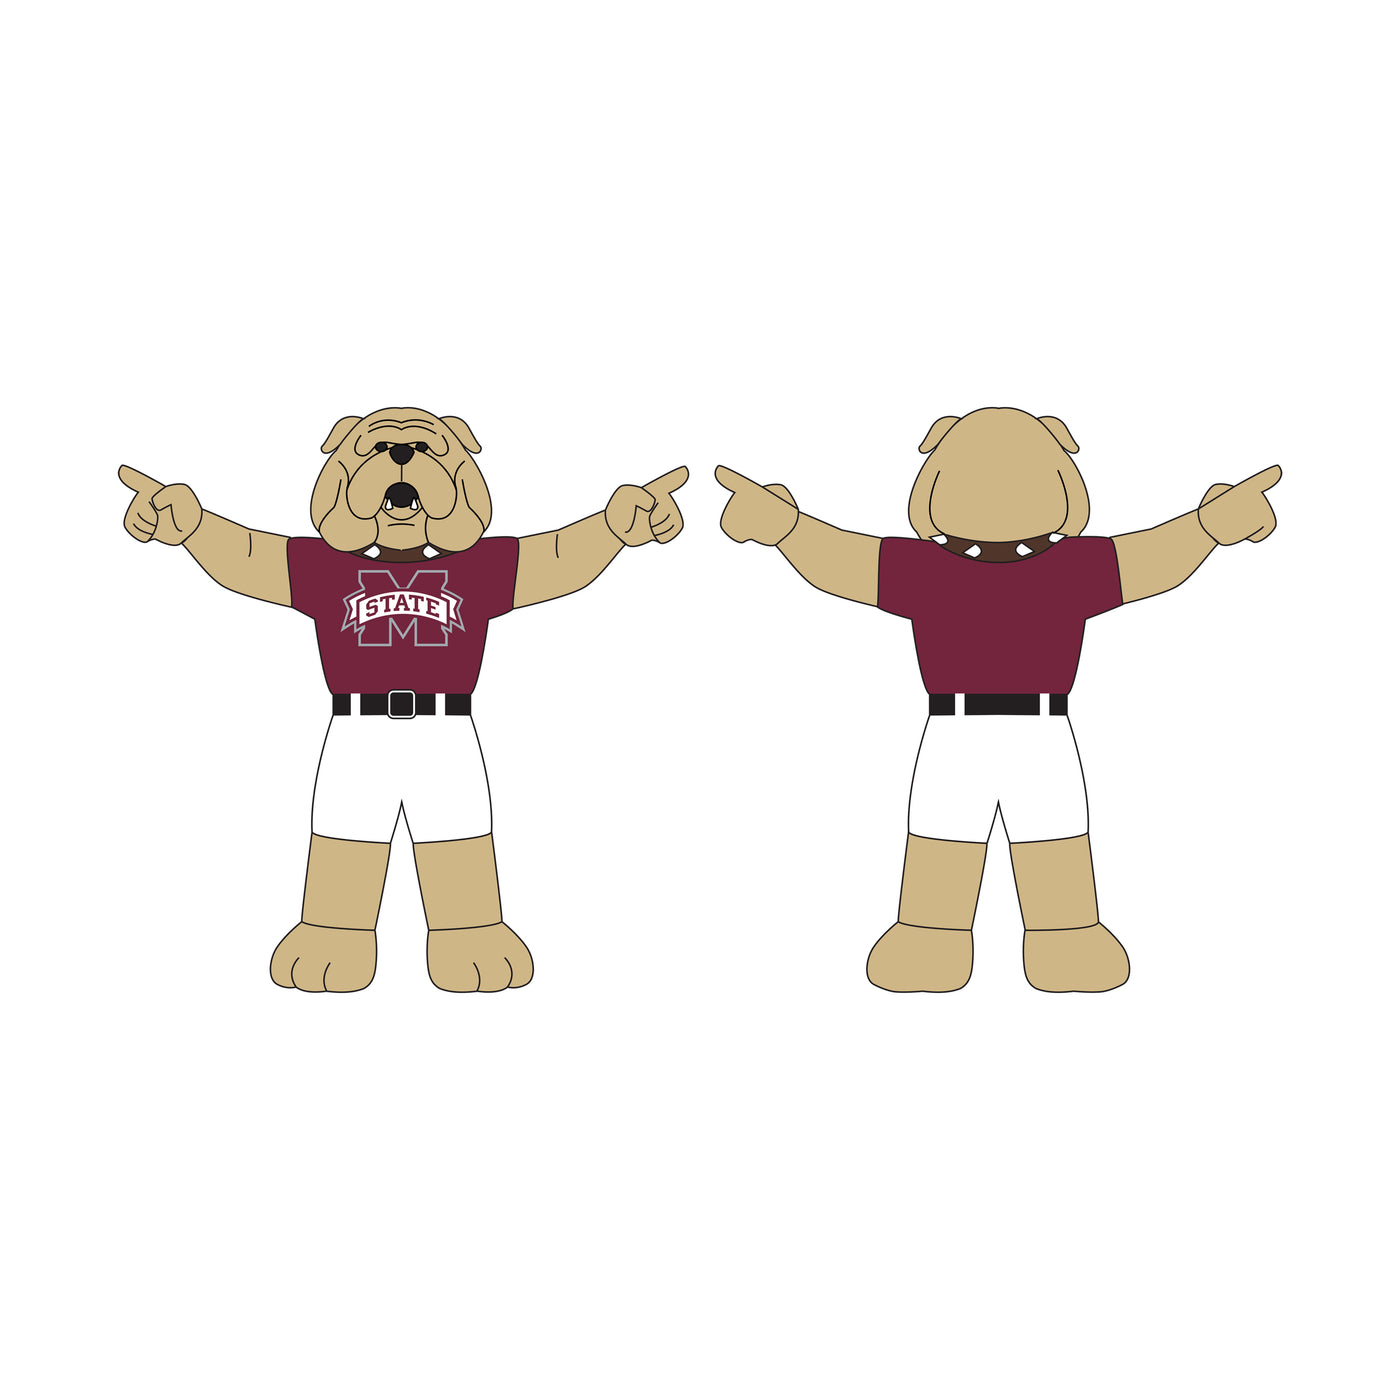 Mississippi State 7ft Yard Inflatable Mascot